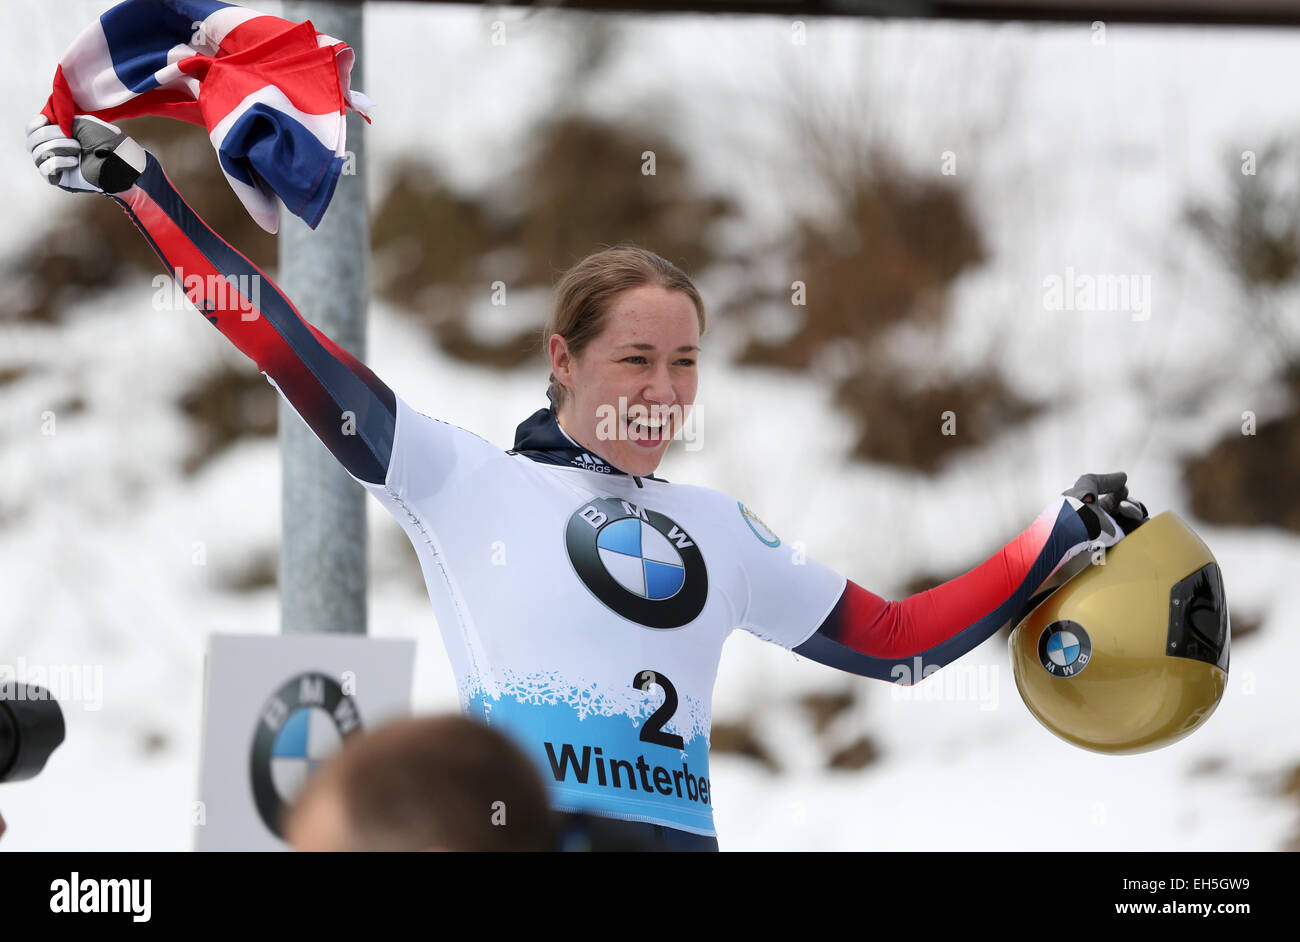 Winterberg, Germany. 07th Mar, 2015. Skeleton racer Lizzy Yarnold of Great Britain celebrates after winning the women's skeleton competition at the Bob & Skeleton World Championships 2015 in Winterberg, Germany, 07 March 2015. Photo: INA FASSBENDER/dpa/Alamy Live News Stock Photo